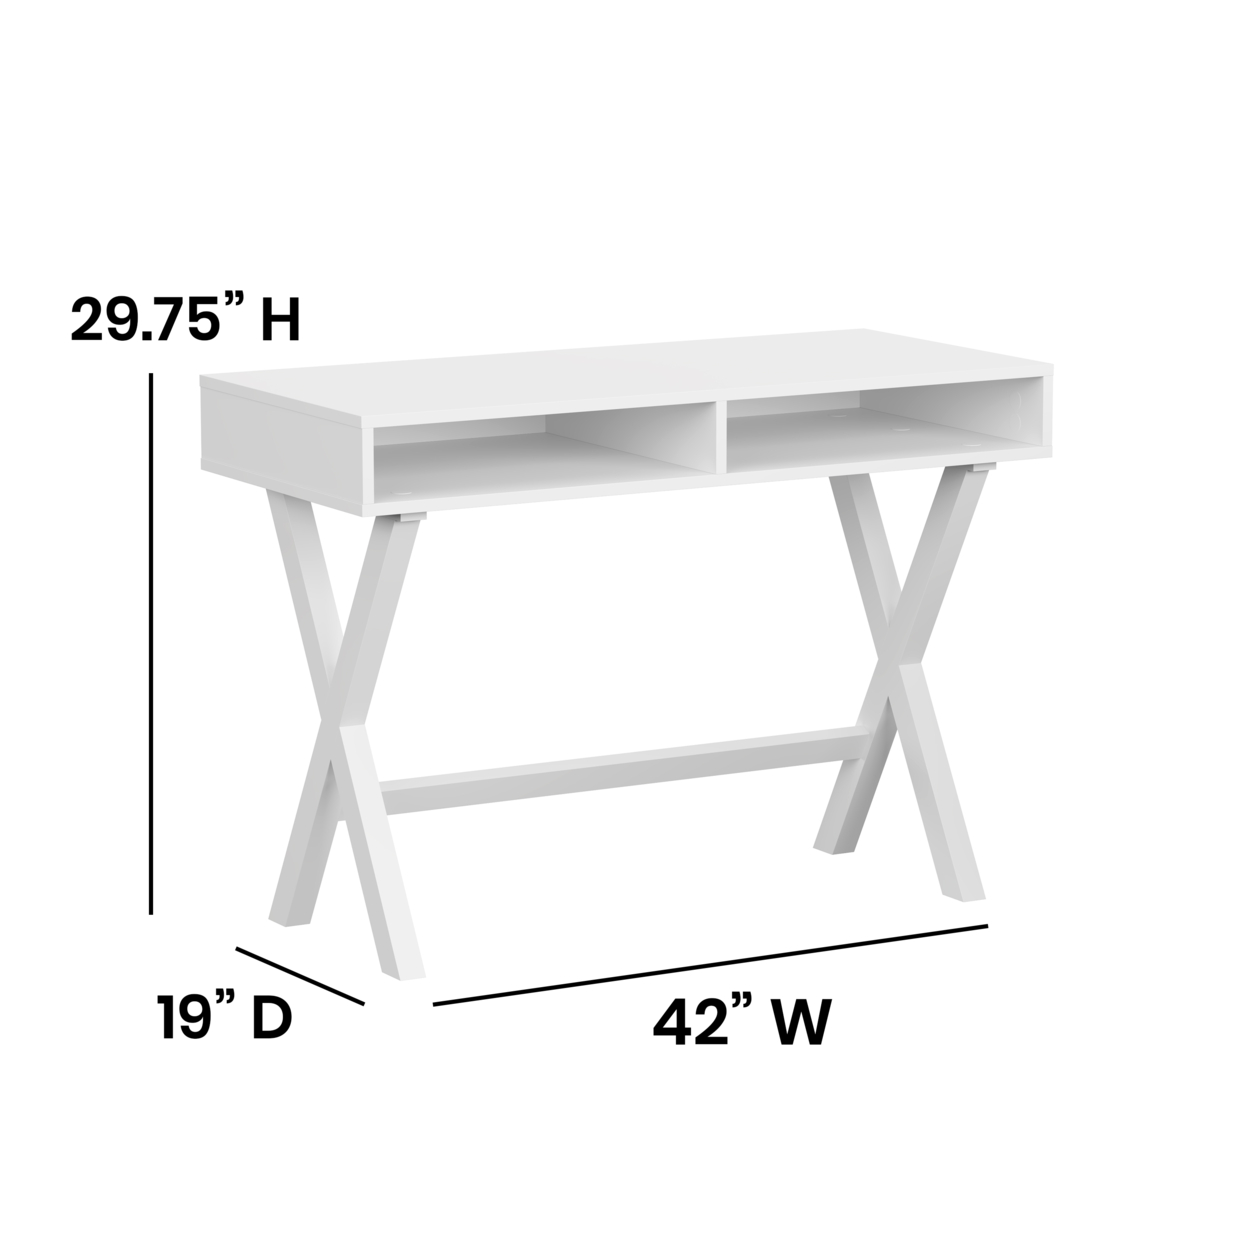 Home Office Writing Computer Desk With Open Storage Compartments - Bedroom Desk For Writing And Work, White